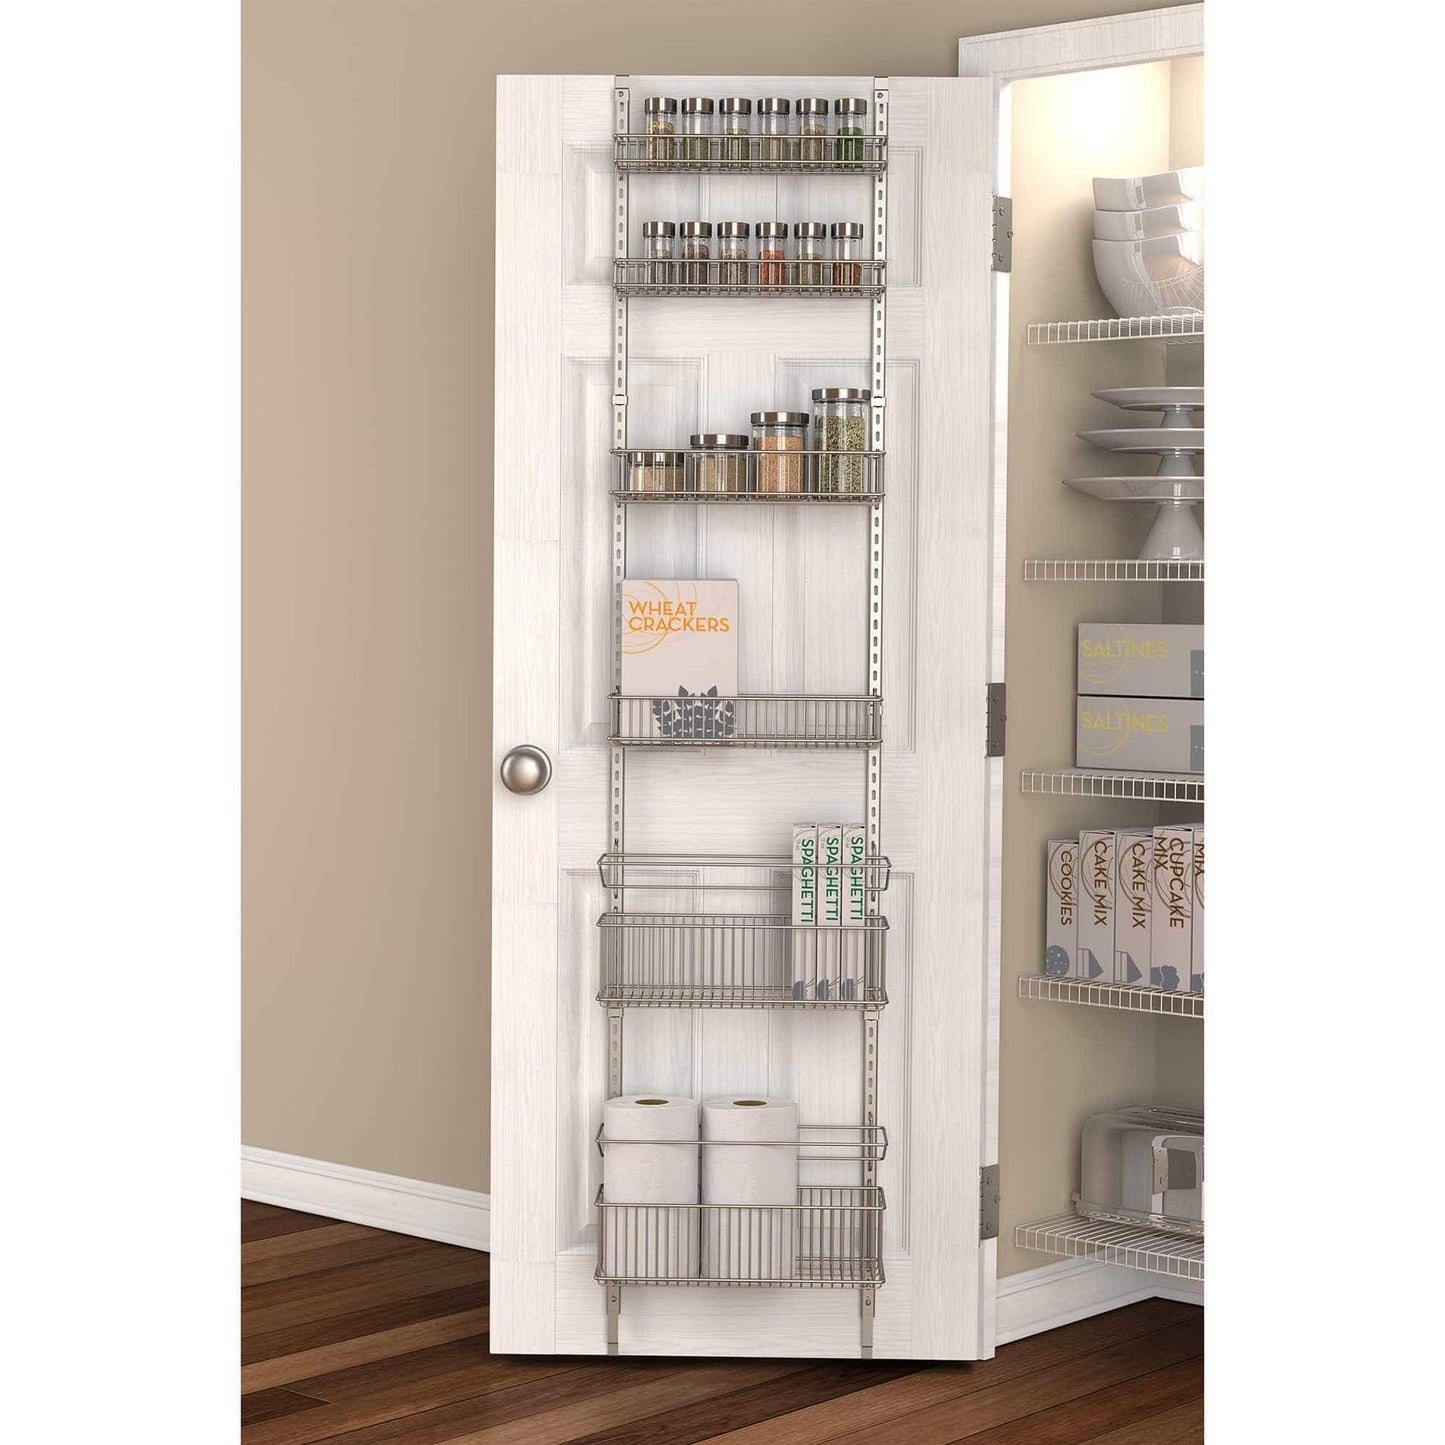 Exclusive premium over the door steel frame kitchen pantry and bath room organizer in satin nickel adjustable shelf system made of solid steel hung or door mounted option